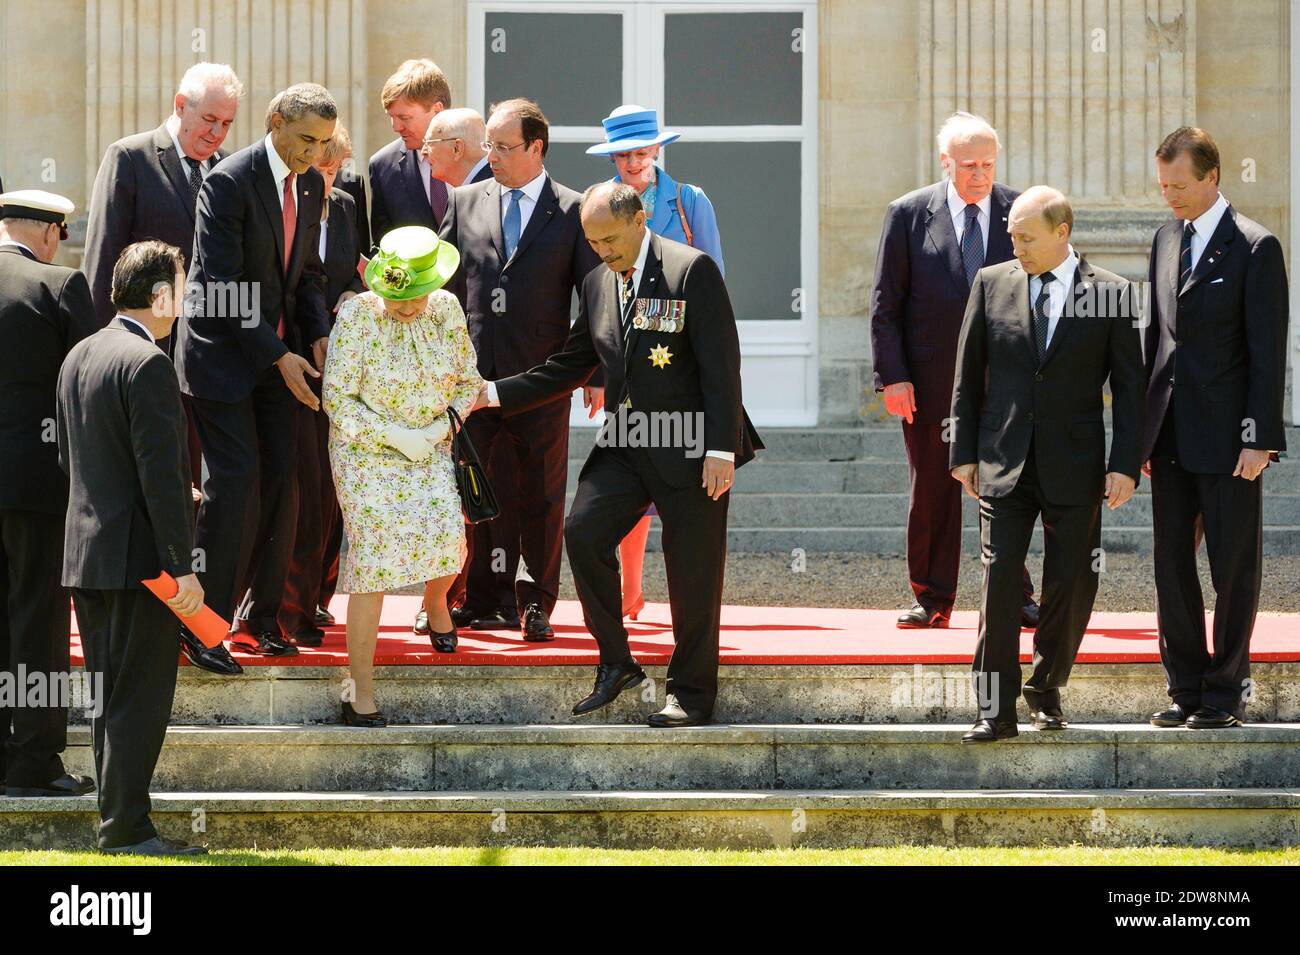 US President Barack Obama and New Zealand Governor-General Jerry Mateparae (R) help Queen Elizabeth II to her position during a group photo of world leaders attending the D-Day 70th Anniversary ceremonies at Chateau de Benouville in Benouville, France, June 6, 2014. The D-Day ceremonies mark the 70th anniversary of the launching of 'Operation Overlord', a vast military operation by Allied forces in Normandy, which turned the tide of World War II, eventually leading to the liberation of occupied France and the end of the war against Nazi Germany. Photo by Christophe Petit Tesson/Pool/ABACAPRESS Stock Photo